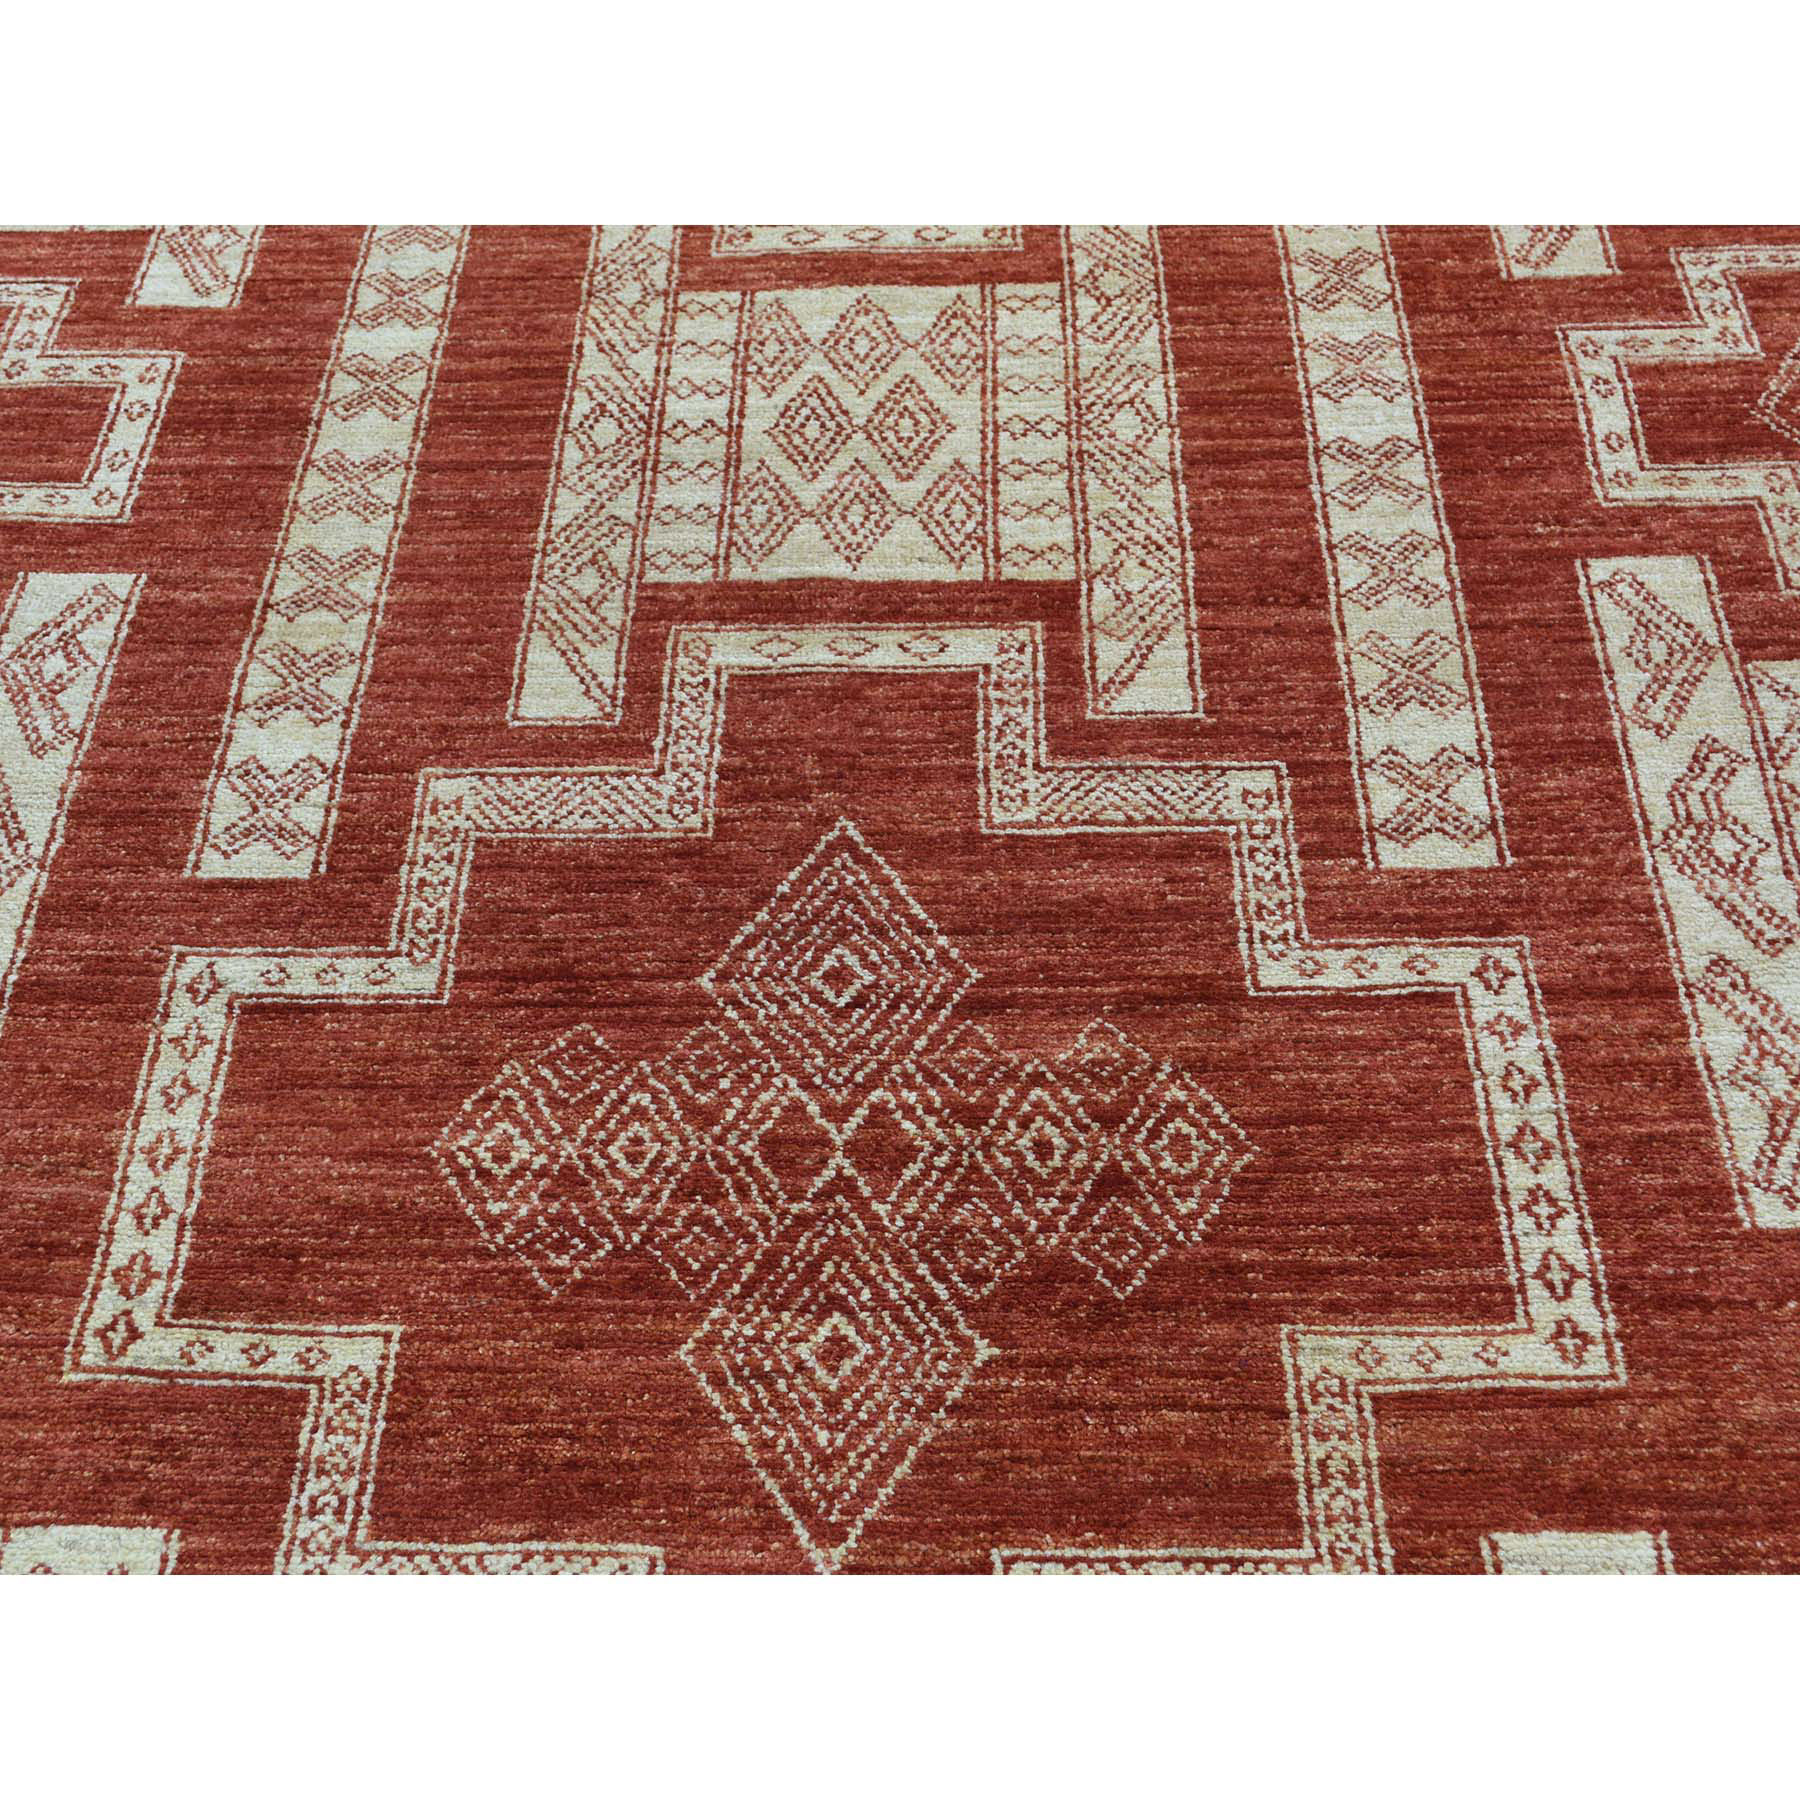 5-10 x8-10  Pure Wool Hand-Knotted Peshawar with Southwestern Motifs Rug 